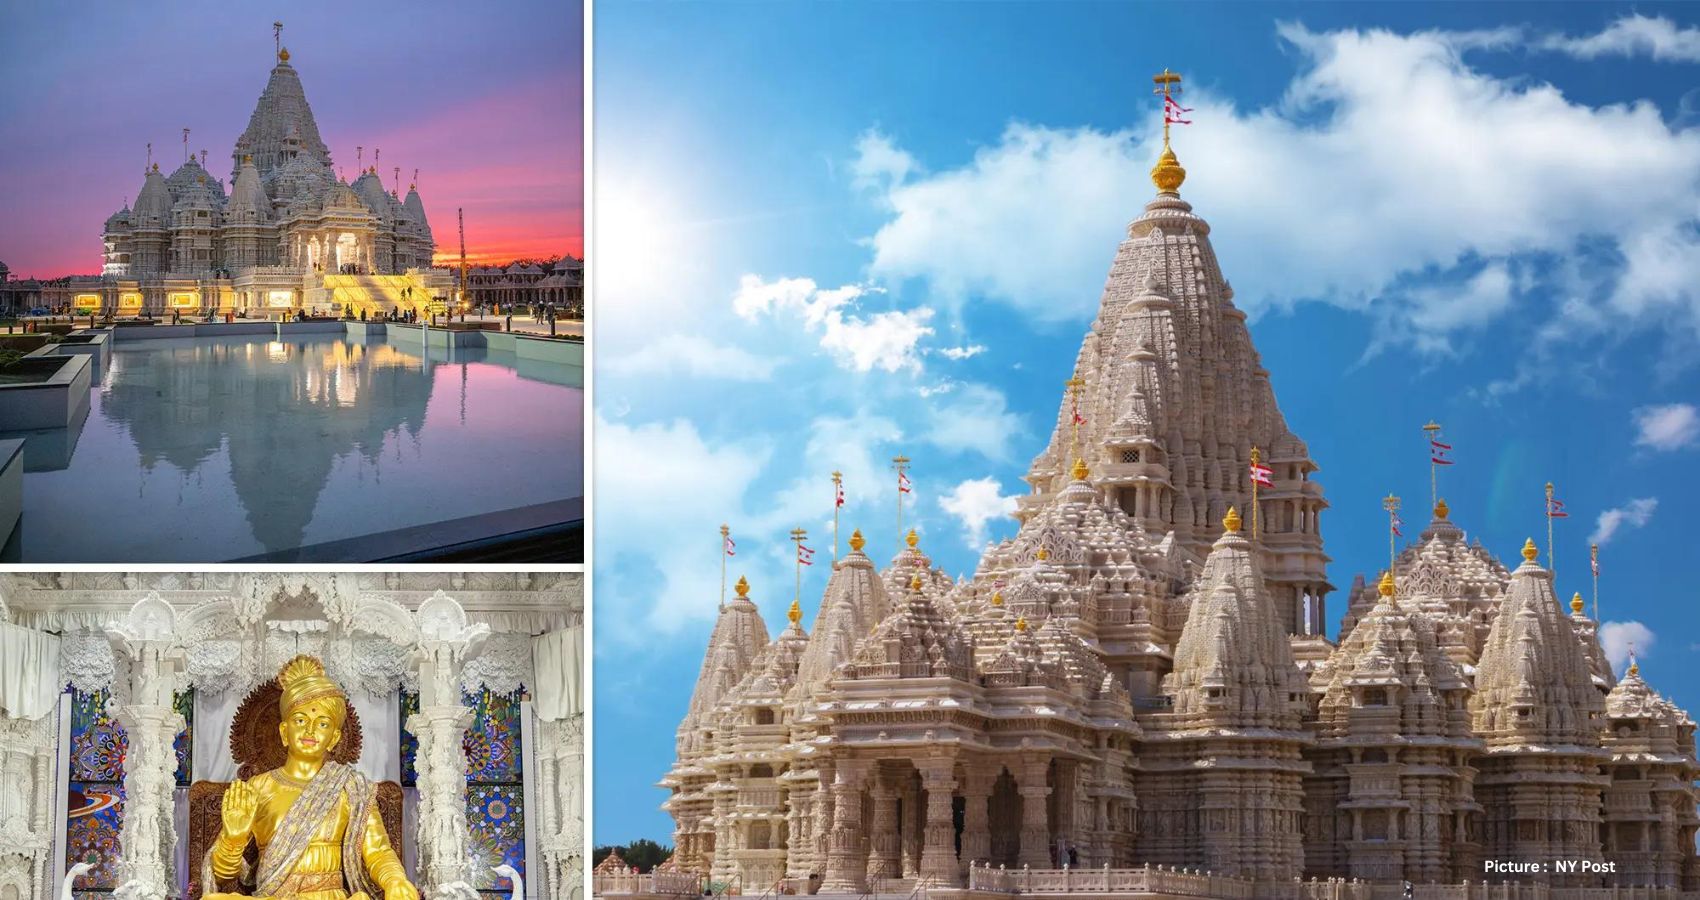 Featured & Cover These Are 10 Of The Great Hindu Temples To Visit In The USA (NYPost) (1)